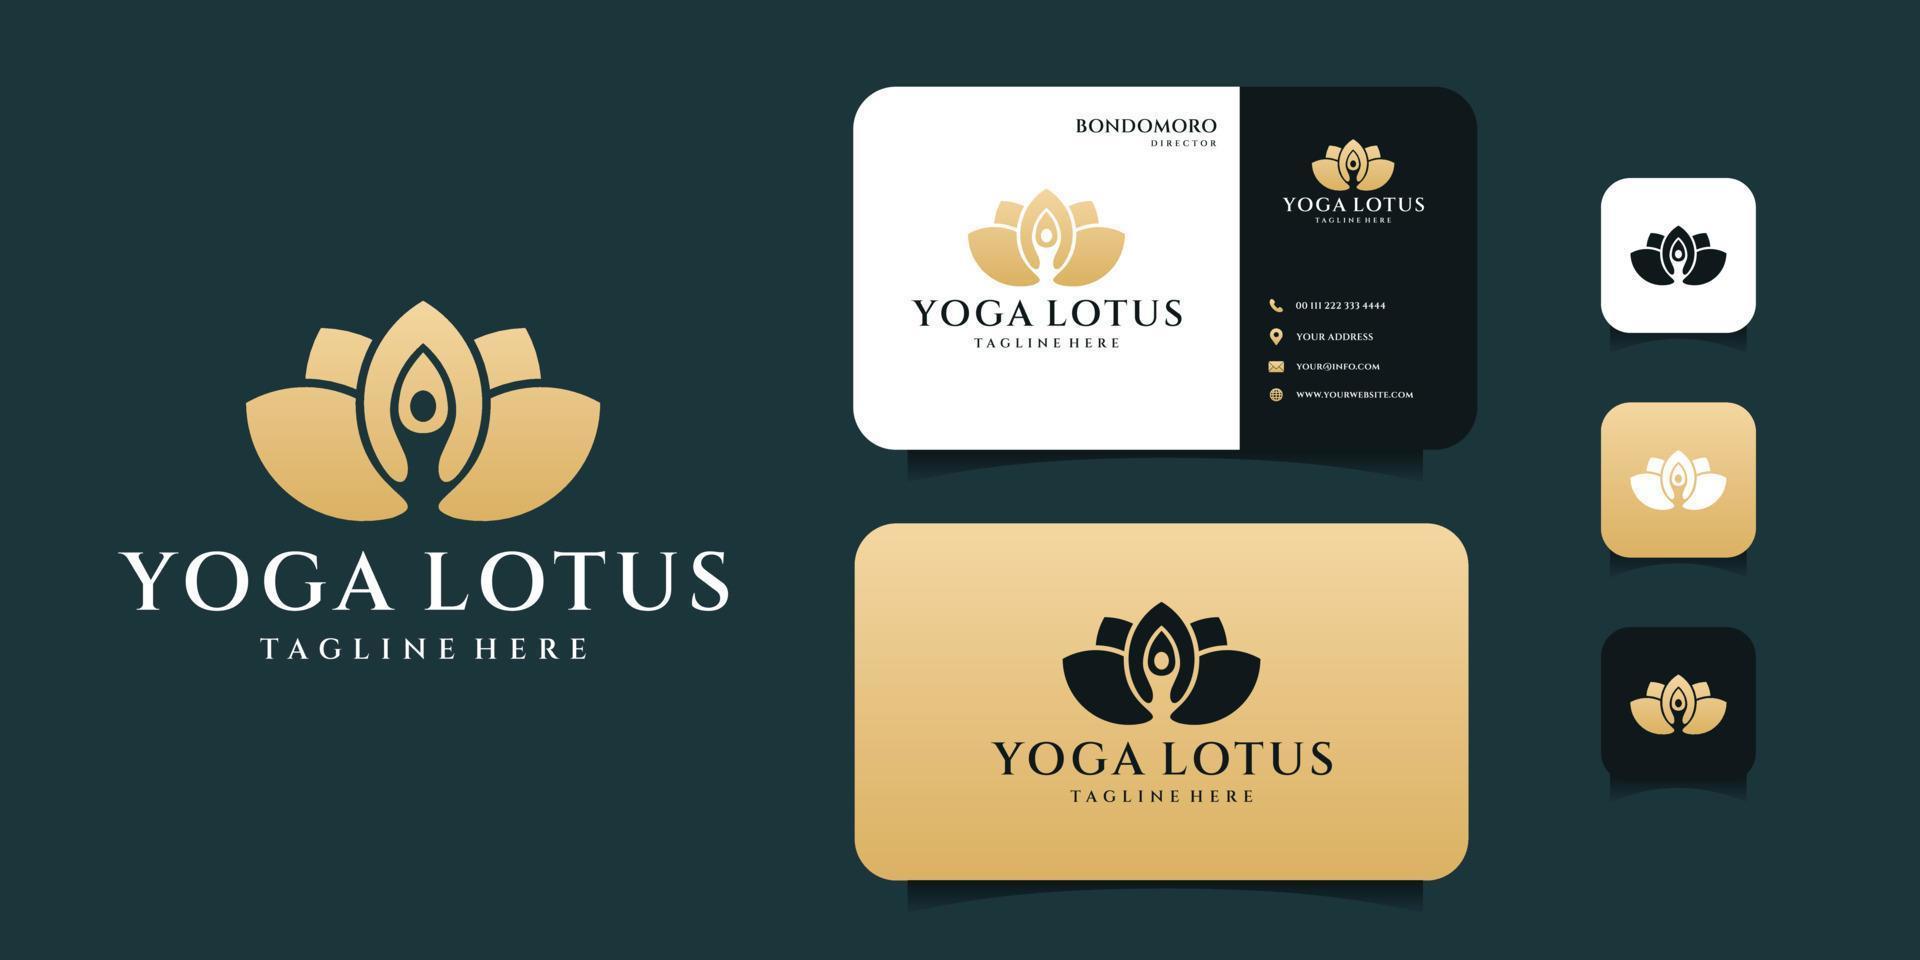 Yoga lotus logo vector with business card template